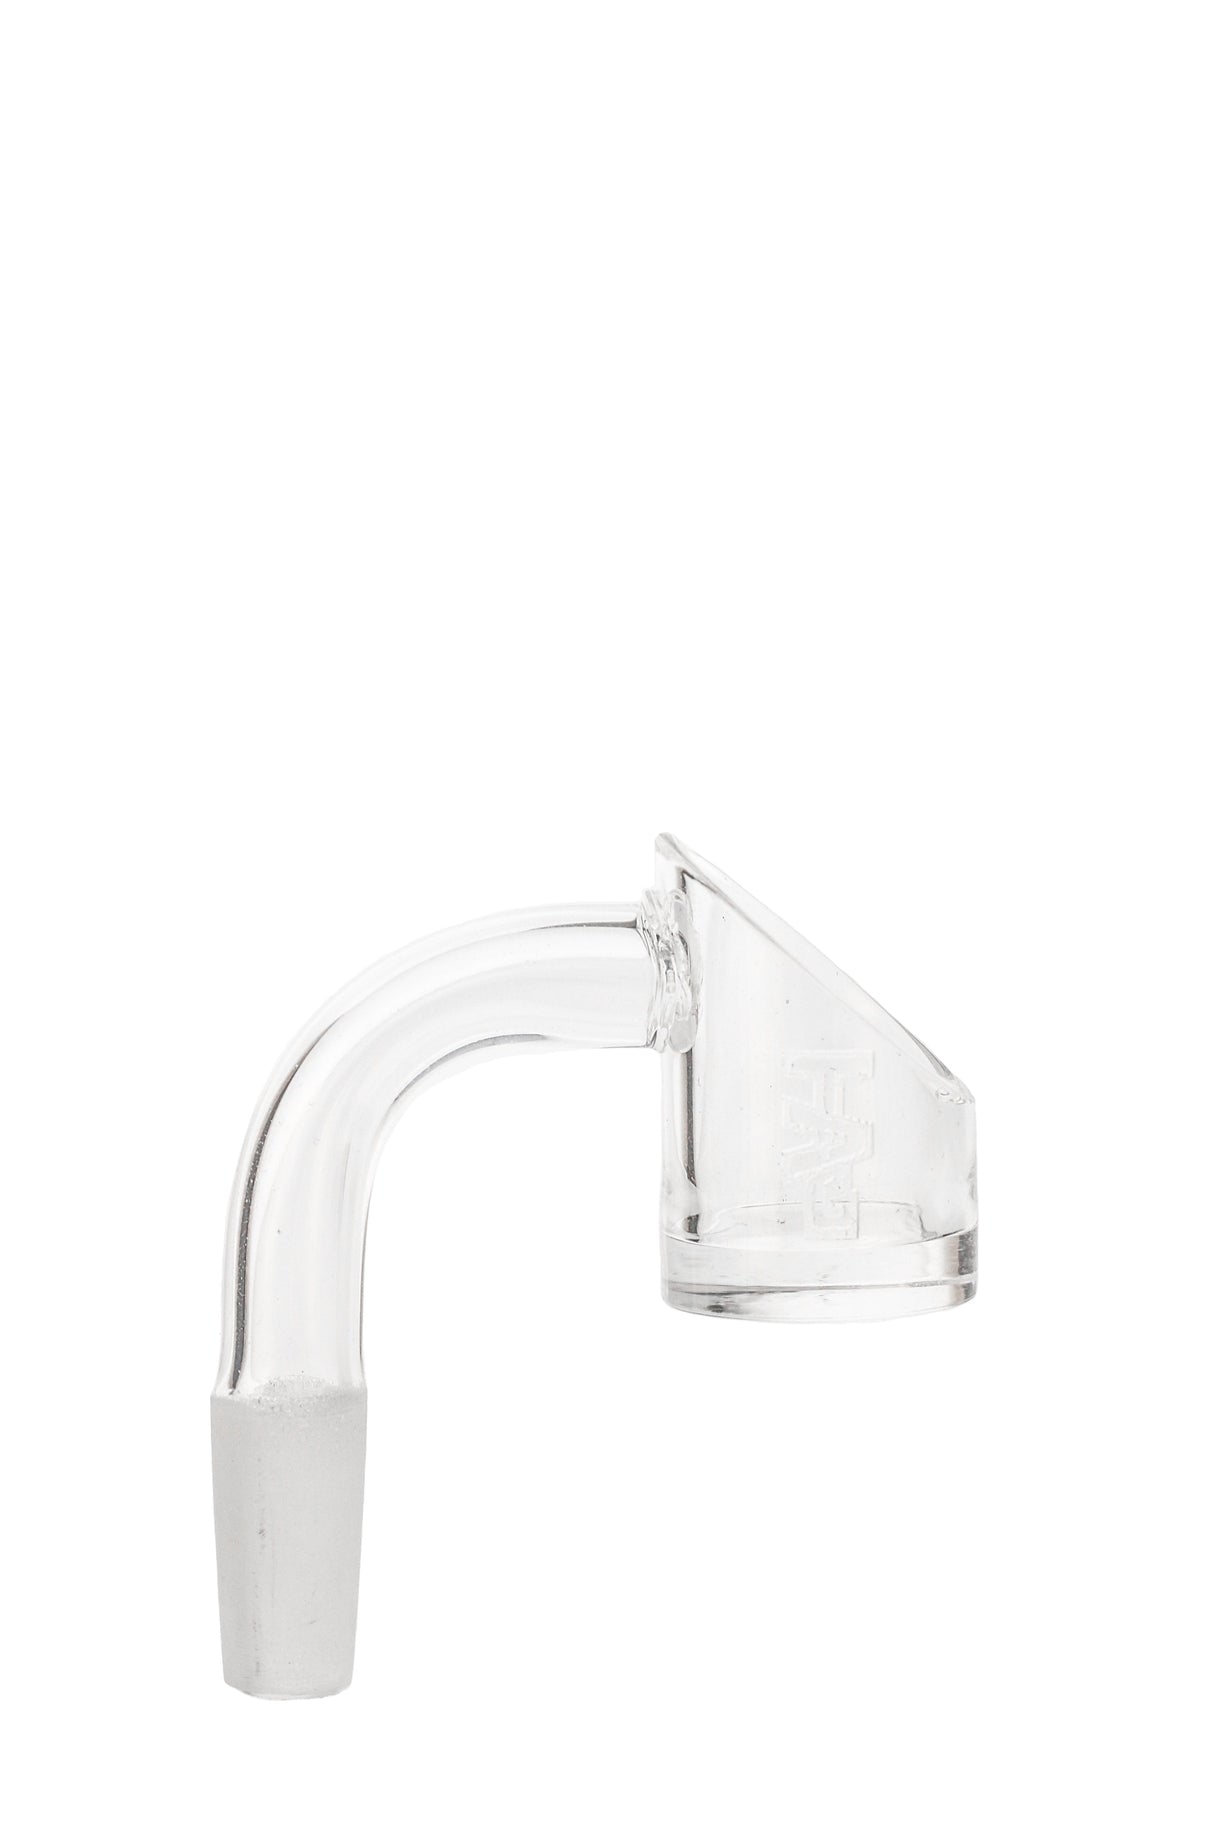 TAG Quartz Banger High Air Flow 14mm Female Joint Side View on Seamless White Background